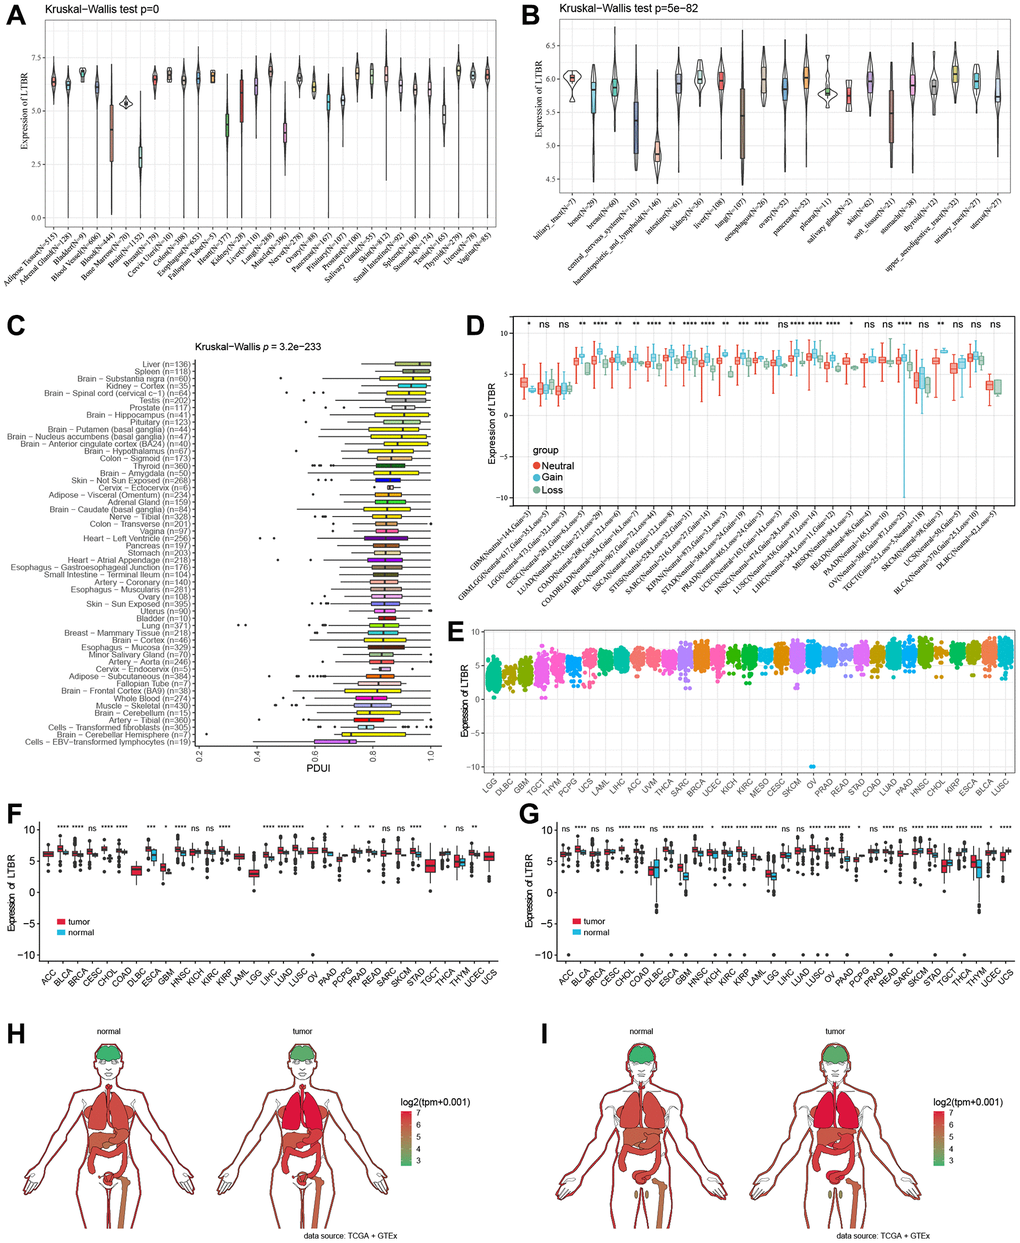 LTBR mRNA expression. (A) LTBR expression in 31 normal tissues and (B) 21 tumor cell lines. (C) APA landscape of LTBR in individual normal tissues. (D) Differential CNV expression levels of LTBR in individual tumors. (E) LTBR mRNA expression in tumor tissues from TCGA database. (F) Expression levels of LTBR in TCGA. (G) Combined GTEx database and TCGA analysis of LTBR expression levels. Anatomical maps of LTBR gene expression profiles in all tumor samples and normal tissues in females (H) and males (I).